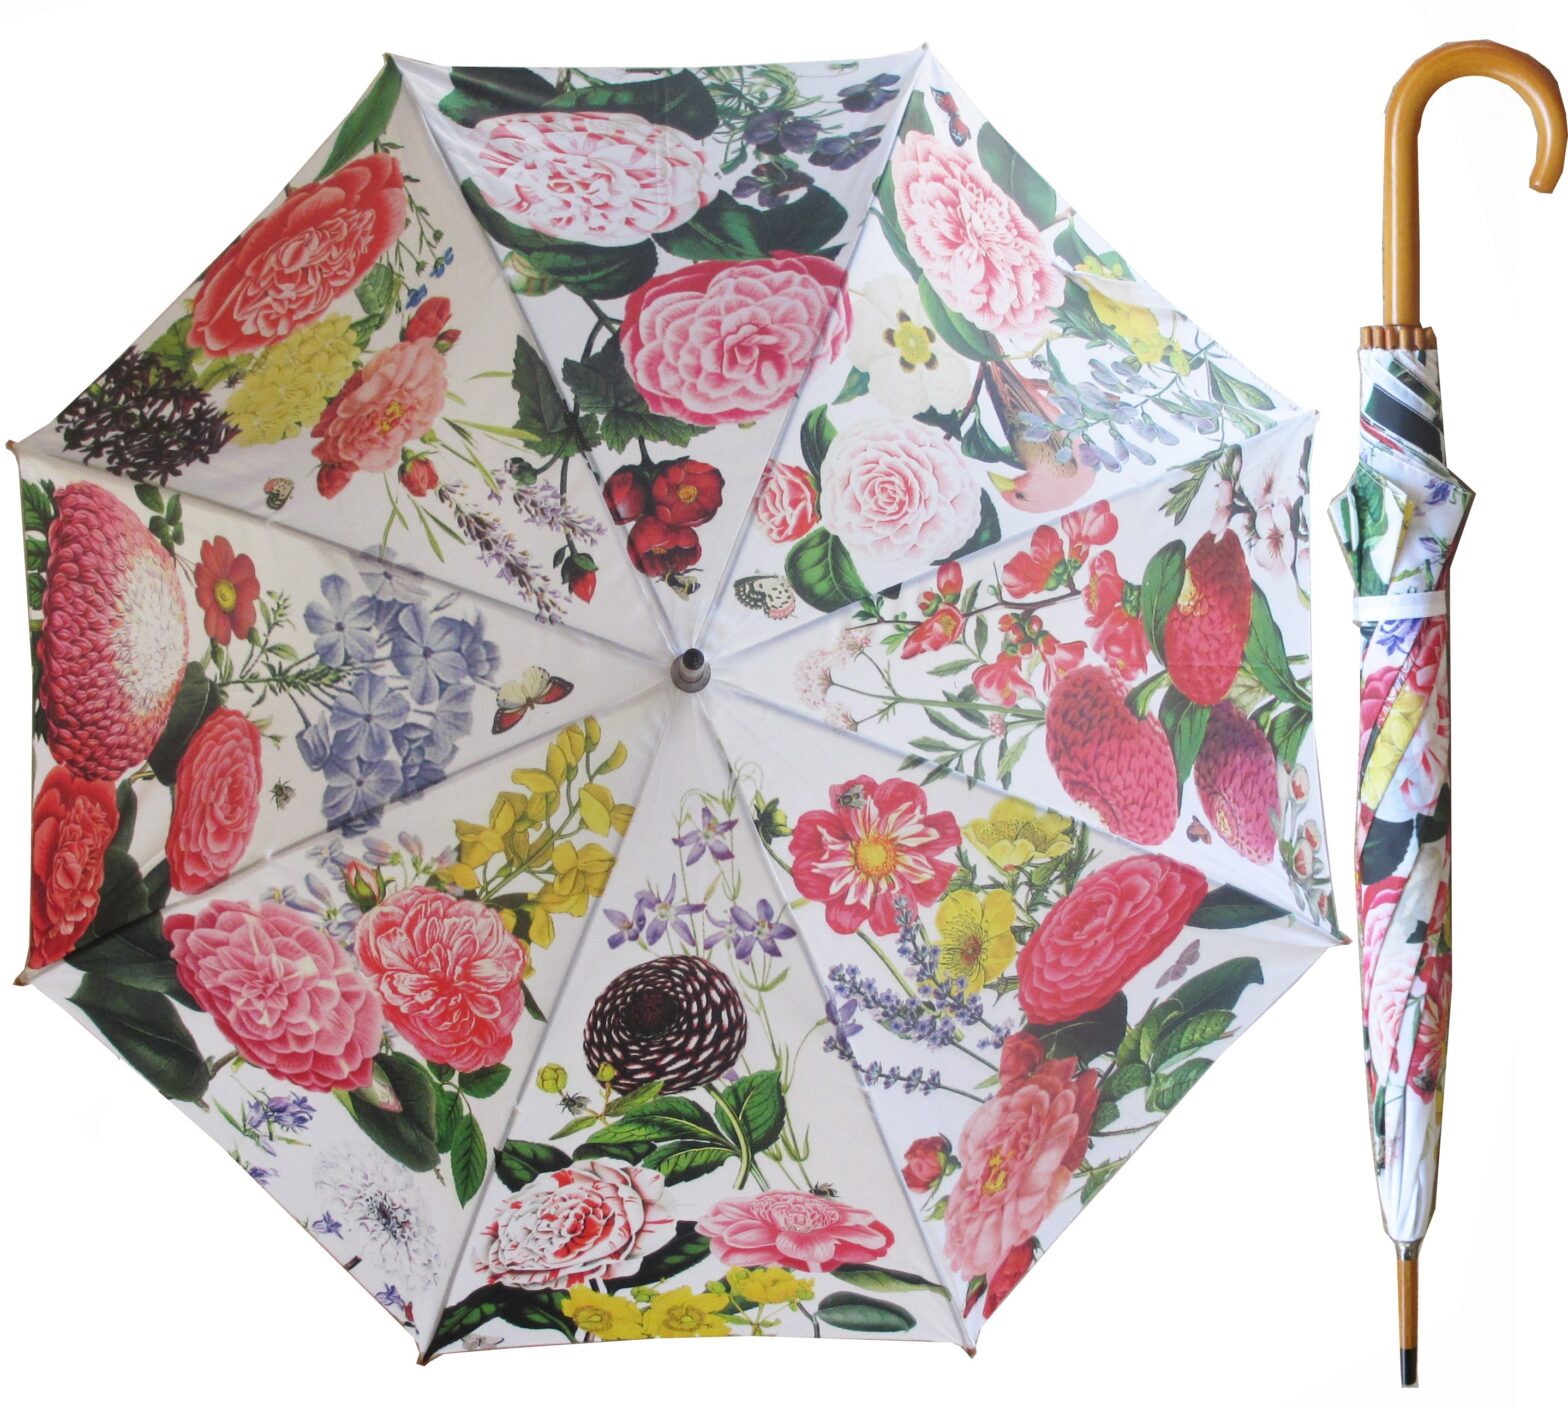 Rosehip umbrella for new spring collection